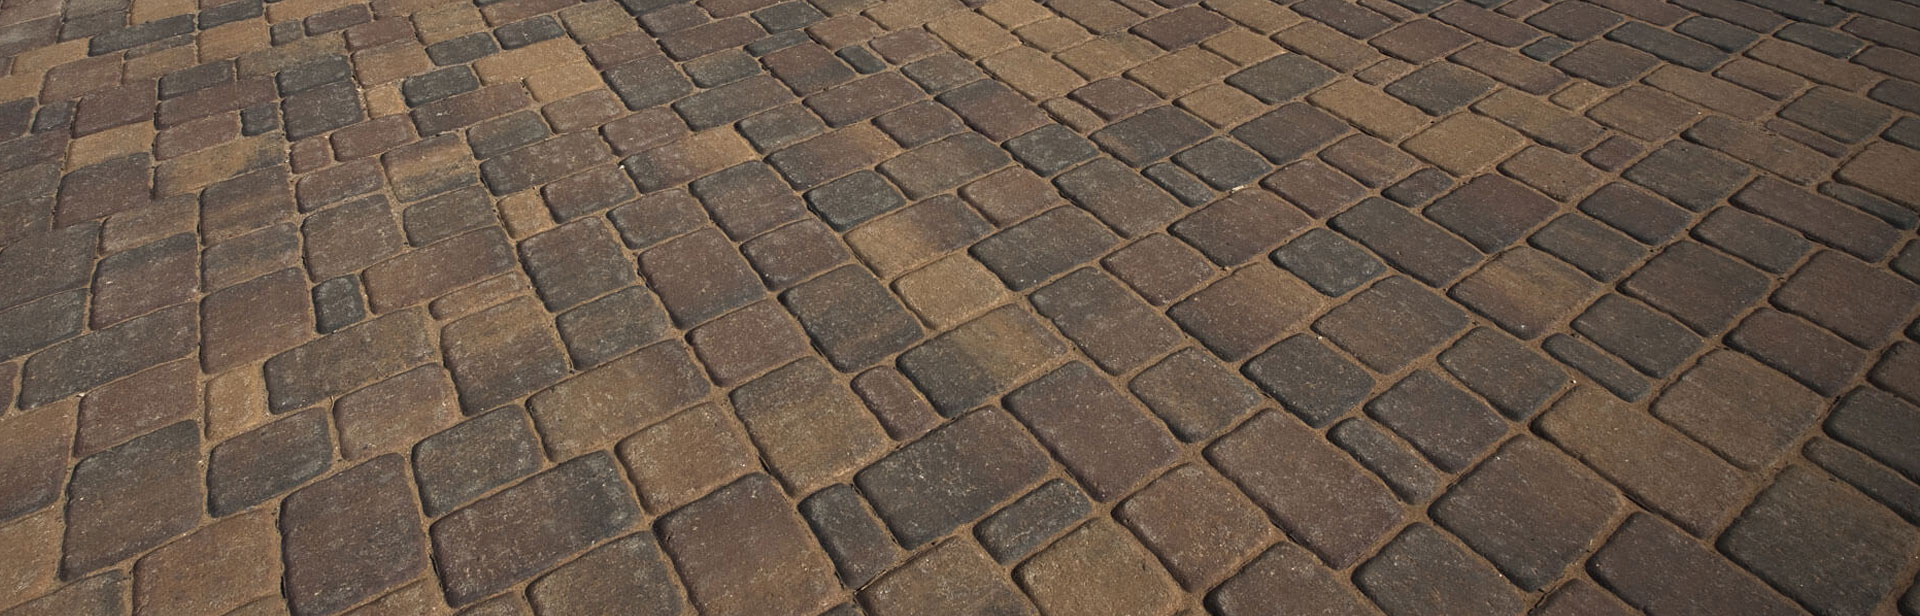 Windermere Brick Paver Installation Services, Paving Stone Installation and Patio Contractor